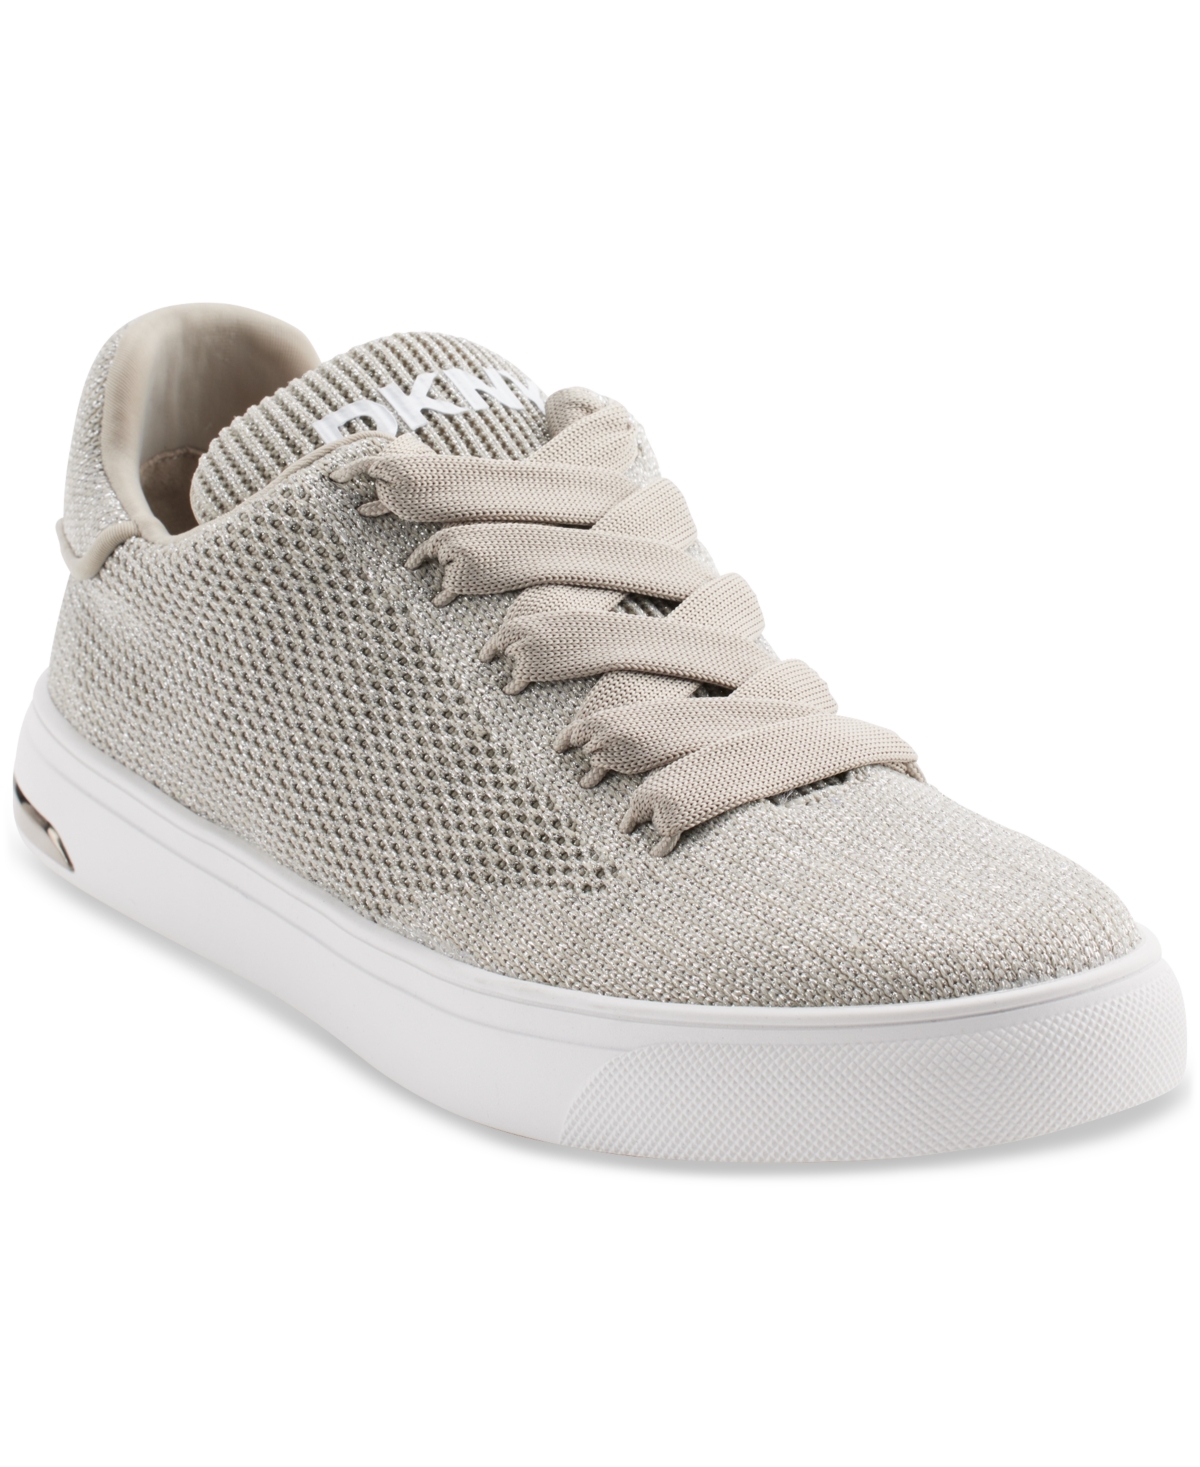 Women's Abeni Lace-Up Low-Top Sneakers - Bright White